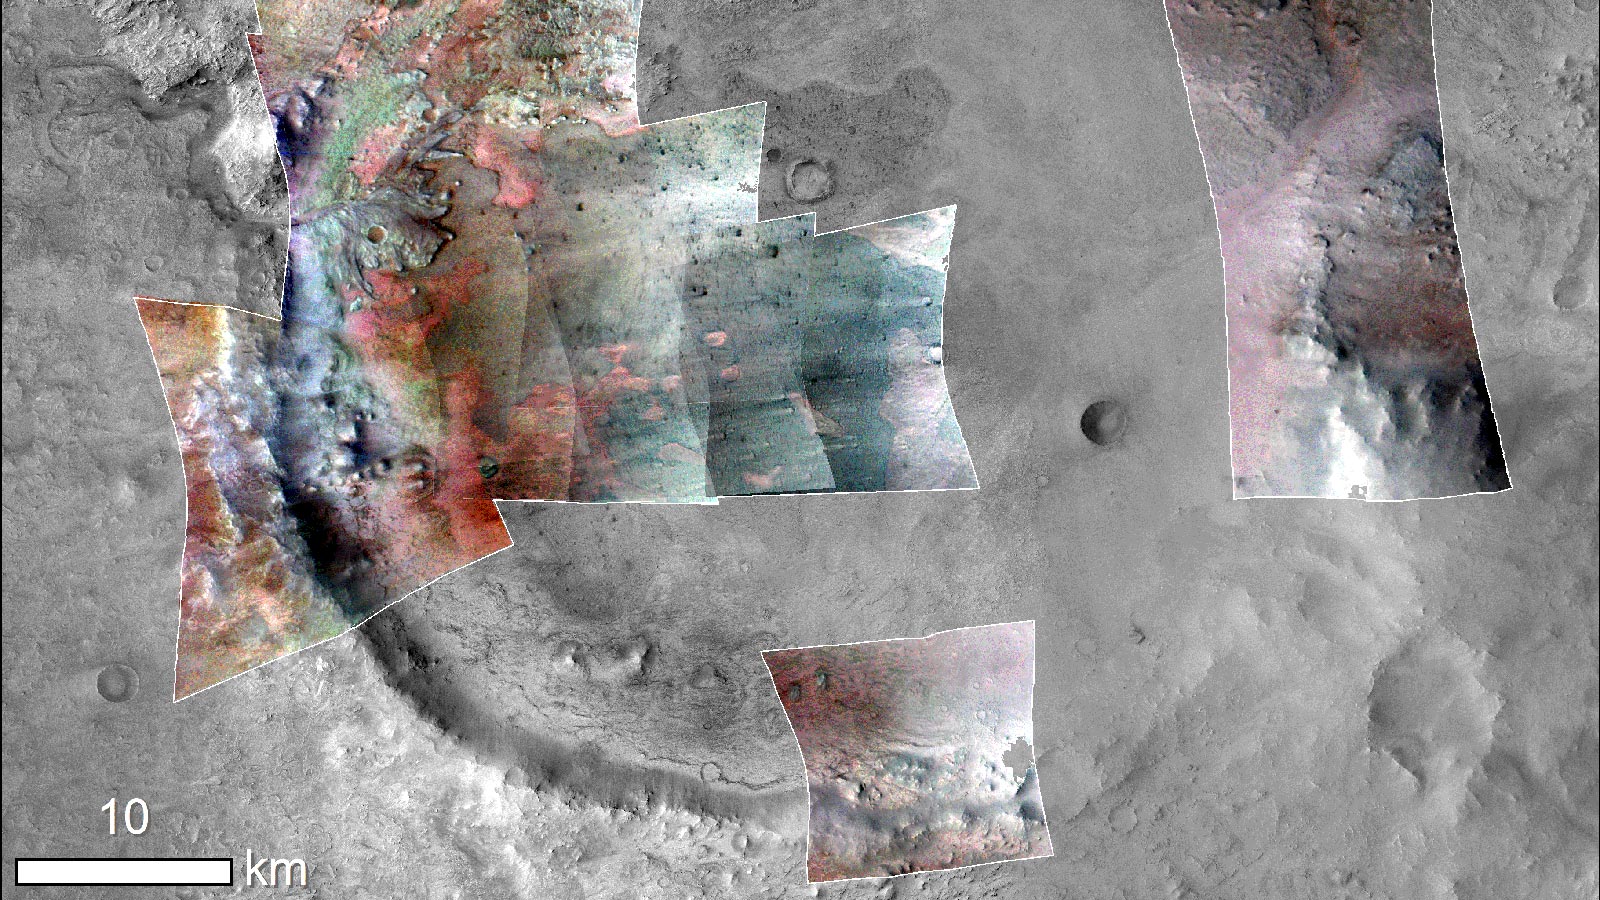 Color has been added to highlight minerals in this image of Jezero Crater on Mars.